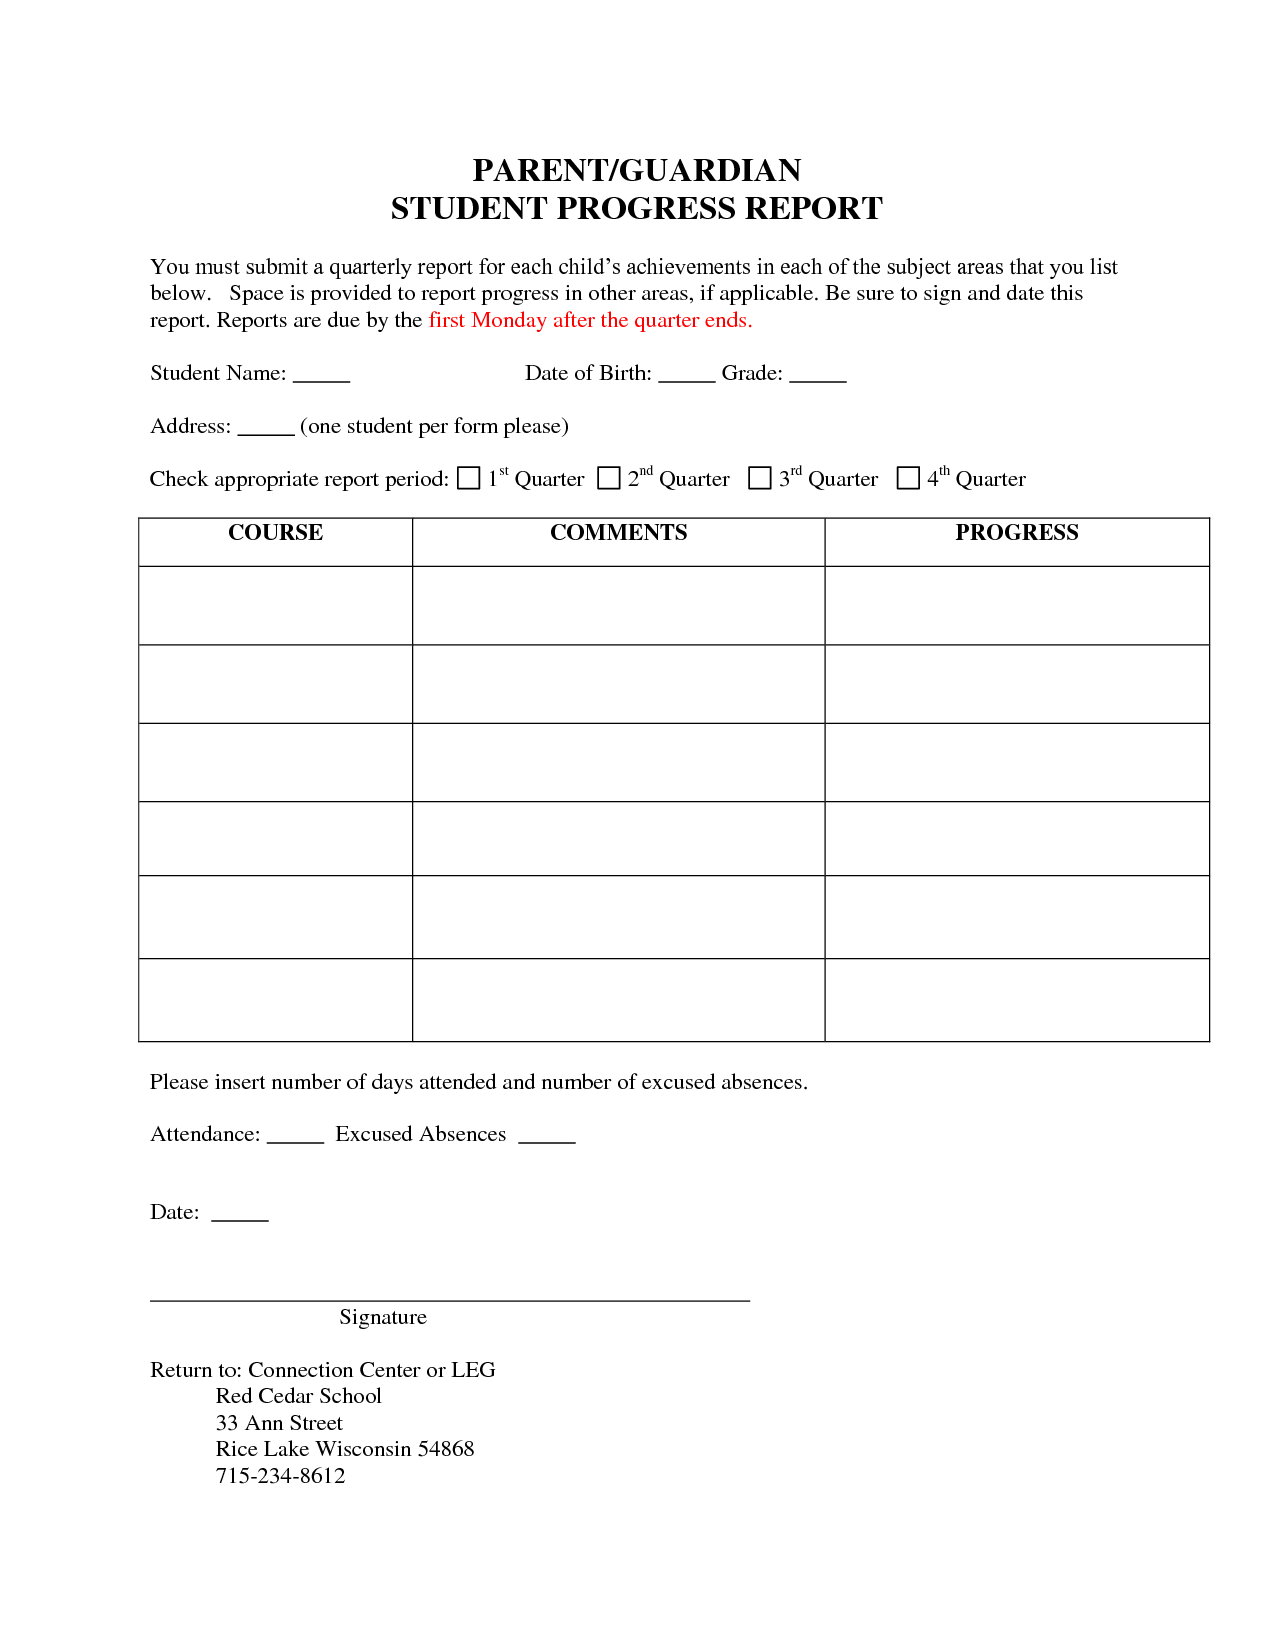 business-templates-weekly-student-progress-report-templates-and-form